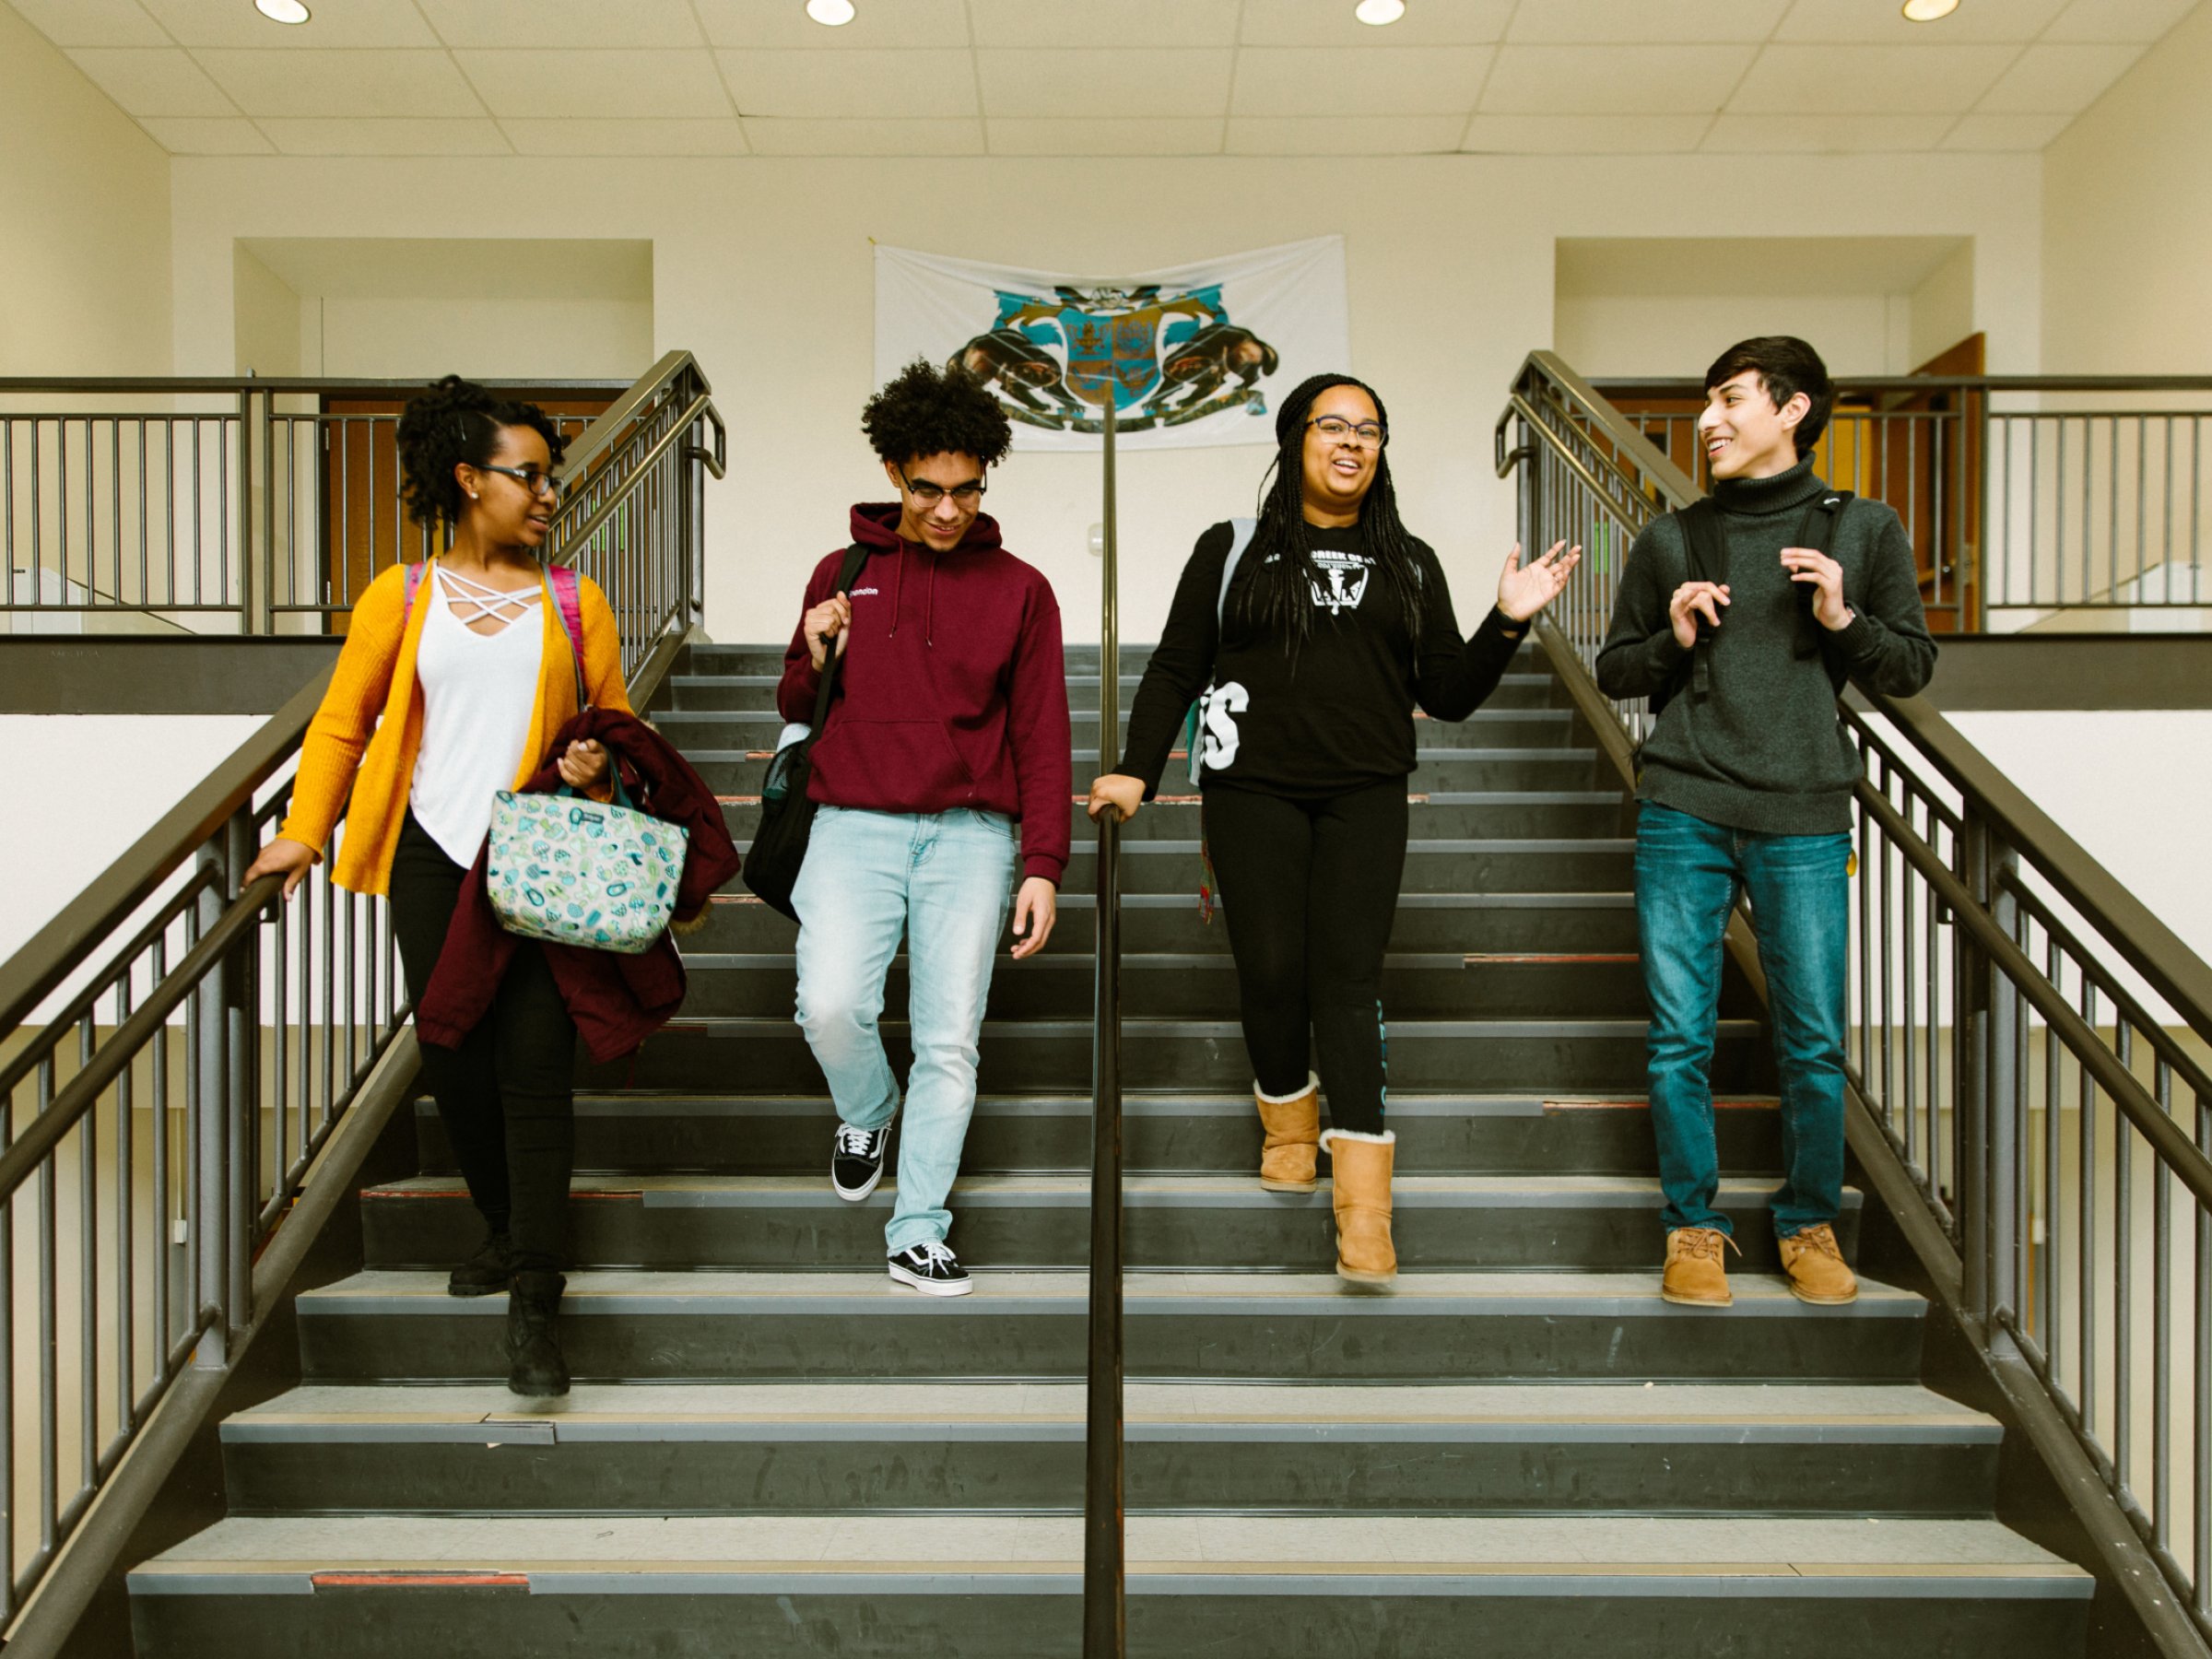 Four students talking while walking down stairs